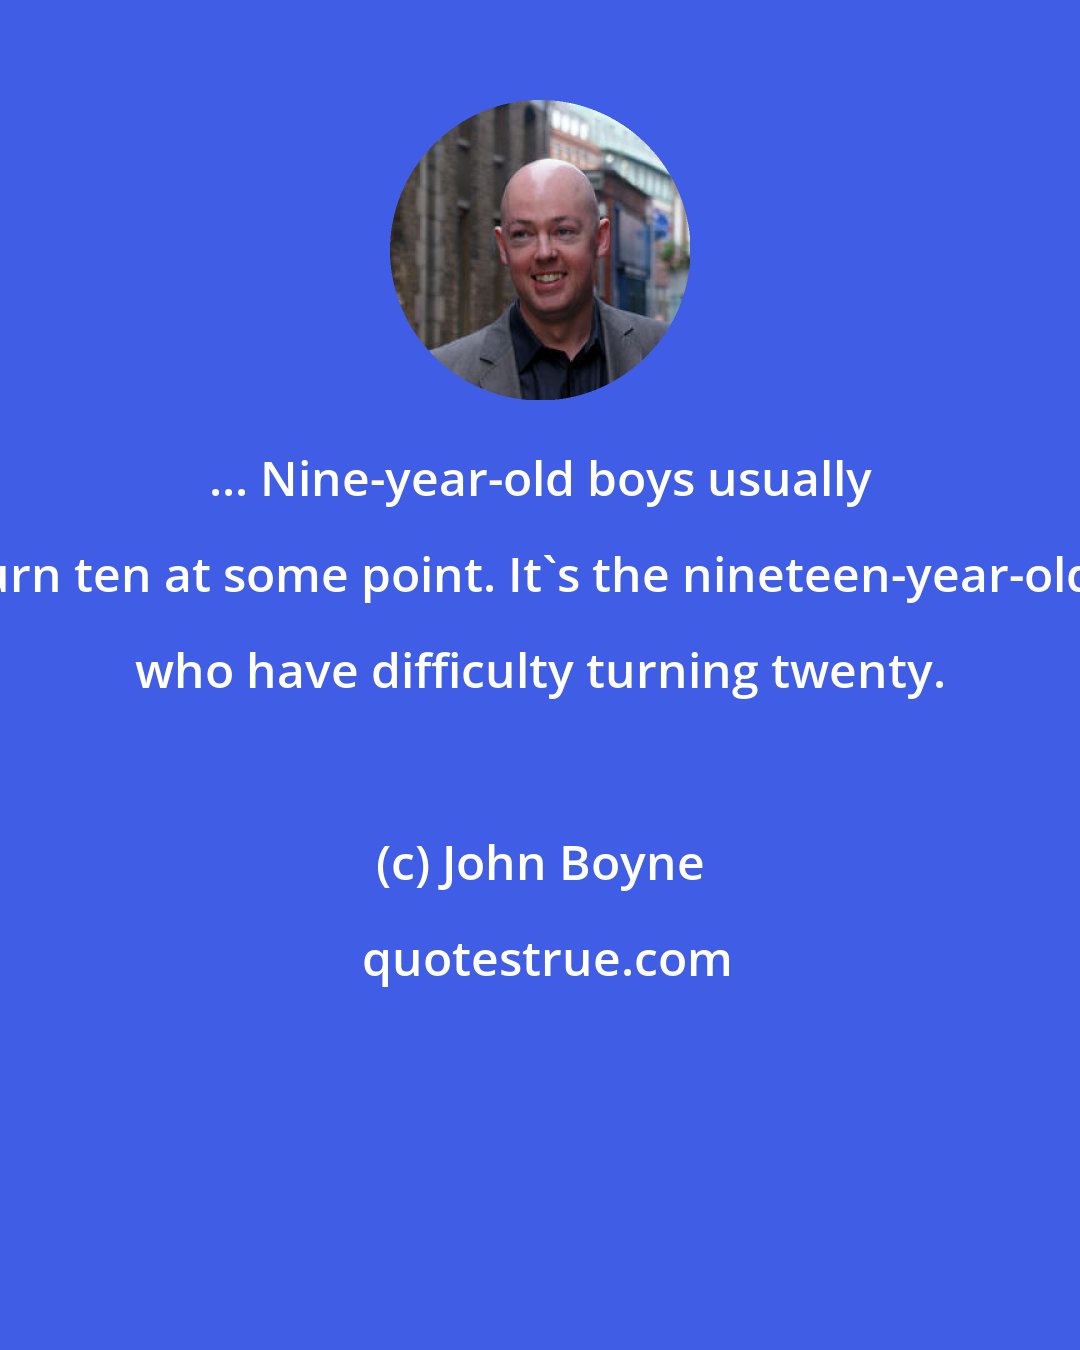 John Boyne: ... Nine-year-old boys usually turn ten at some point. It's the nineteen-year-olds who have difficulty turning twenty.